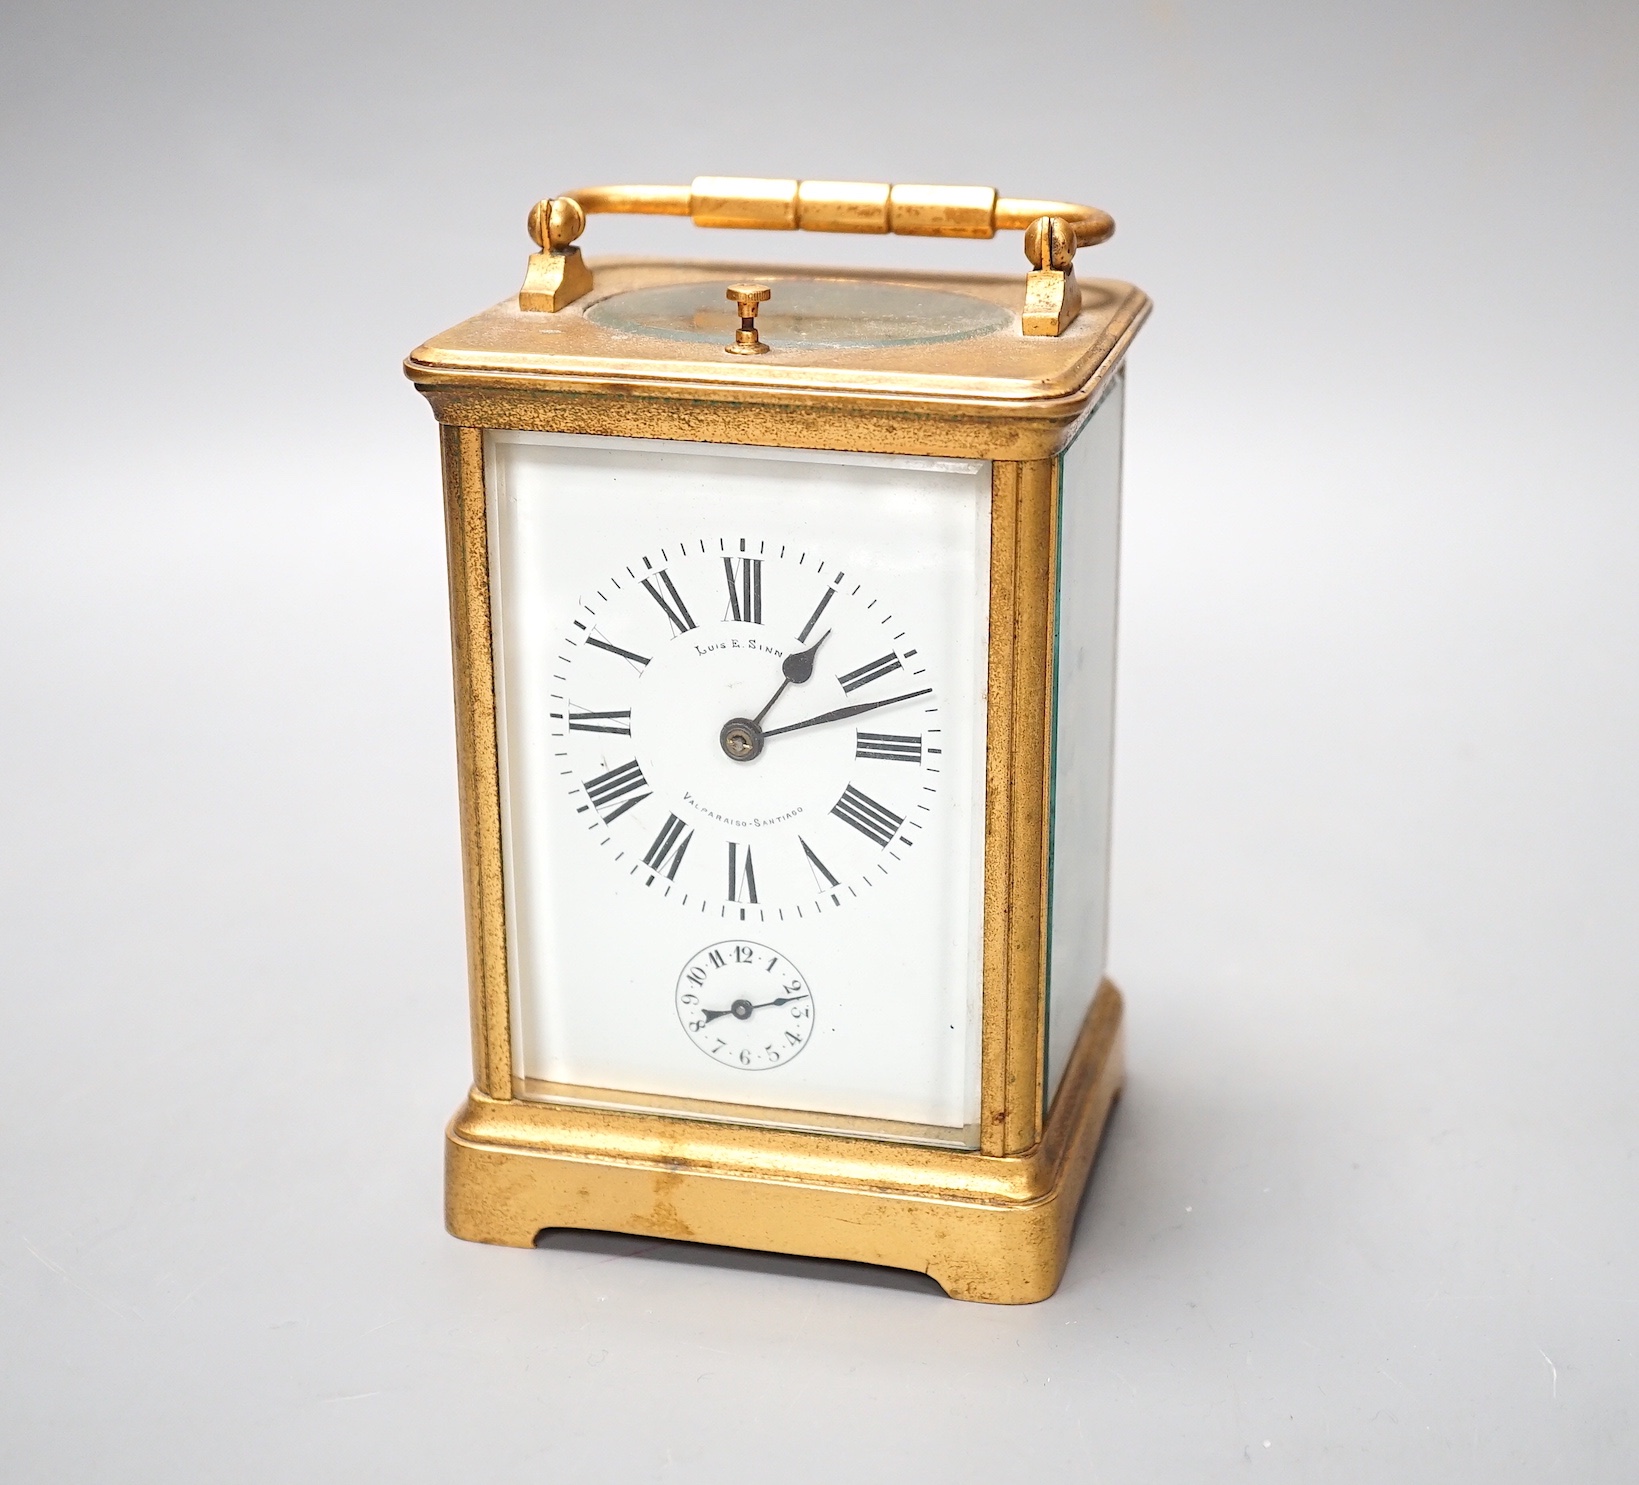 A French brass carriage clock with alarm and push repeat, retailers mark Luis E. Sinn Co. - 15cm